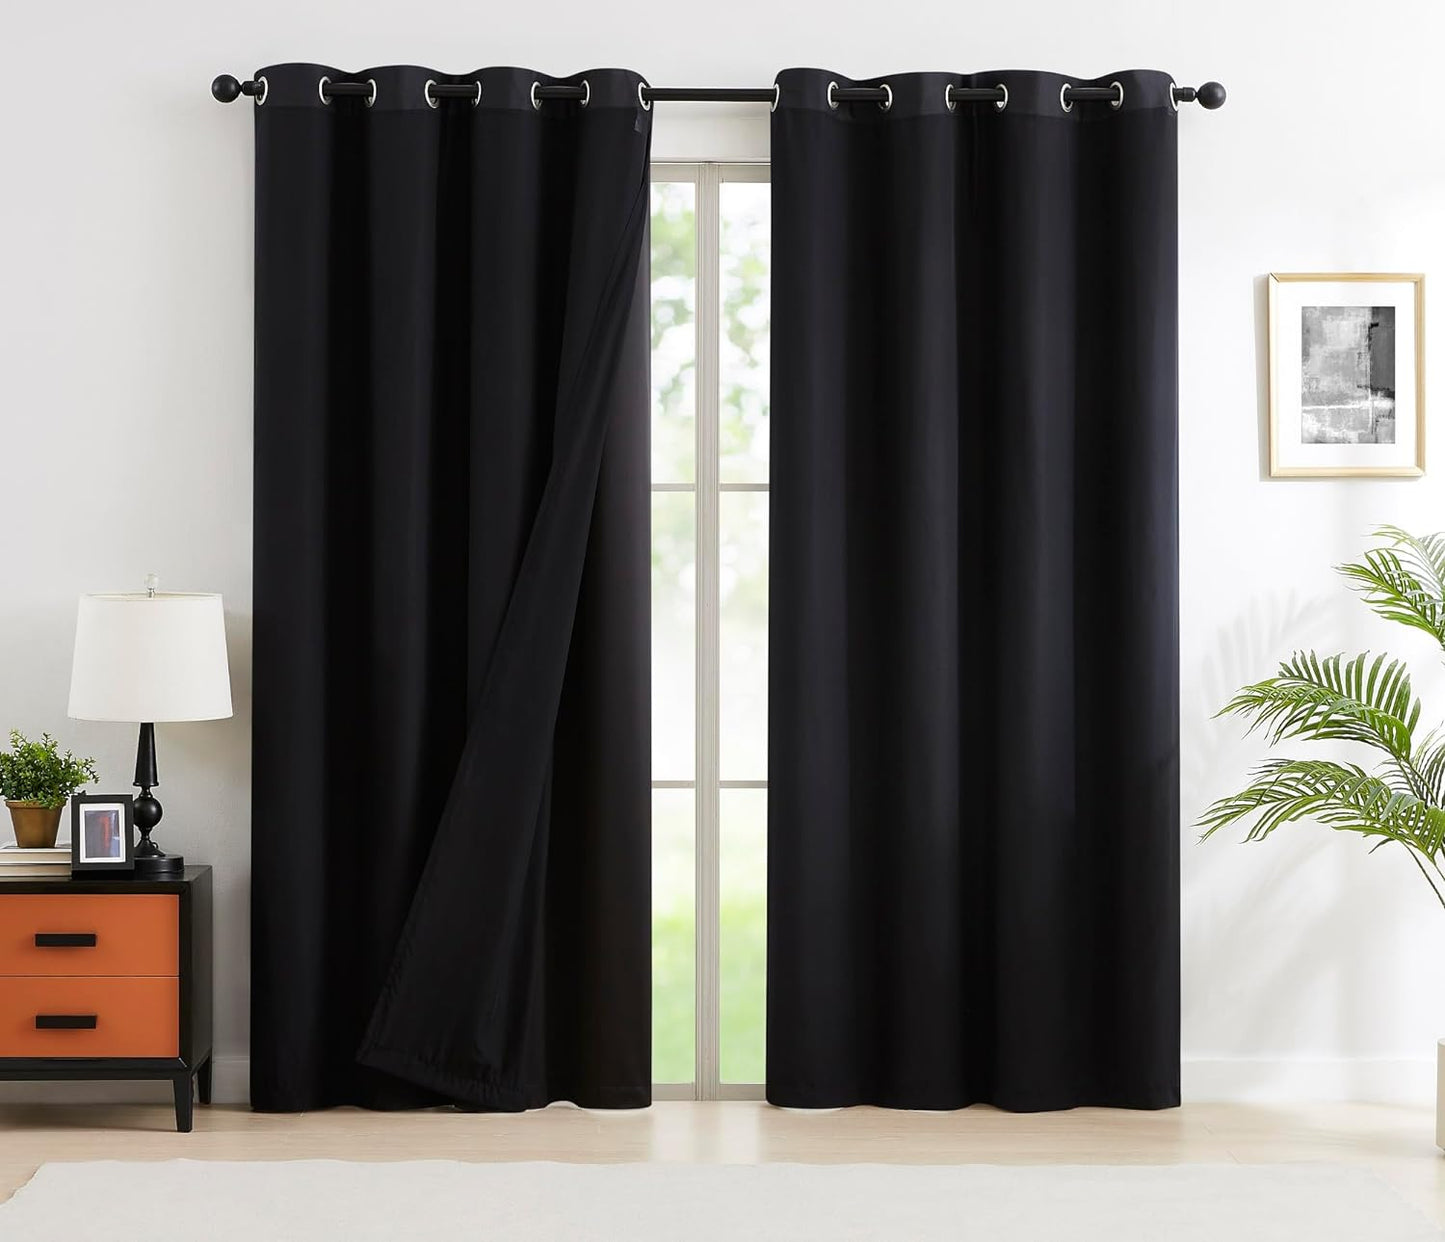 Mix and Match Blackout Curtains - Bedroom Solid Black Full Blackout Window Panels & Black Chiffon Sheer Curtains Thermal Insulated Drapes for Living Room, Grommet, 52" W X 63" L, Set of 4  Purainbow Black 52" X 95" 